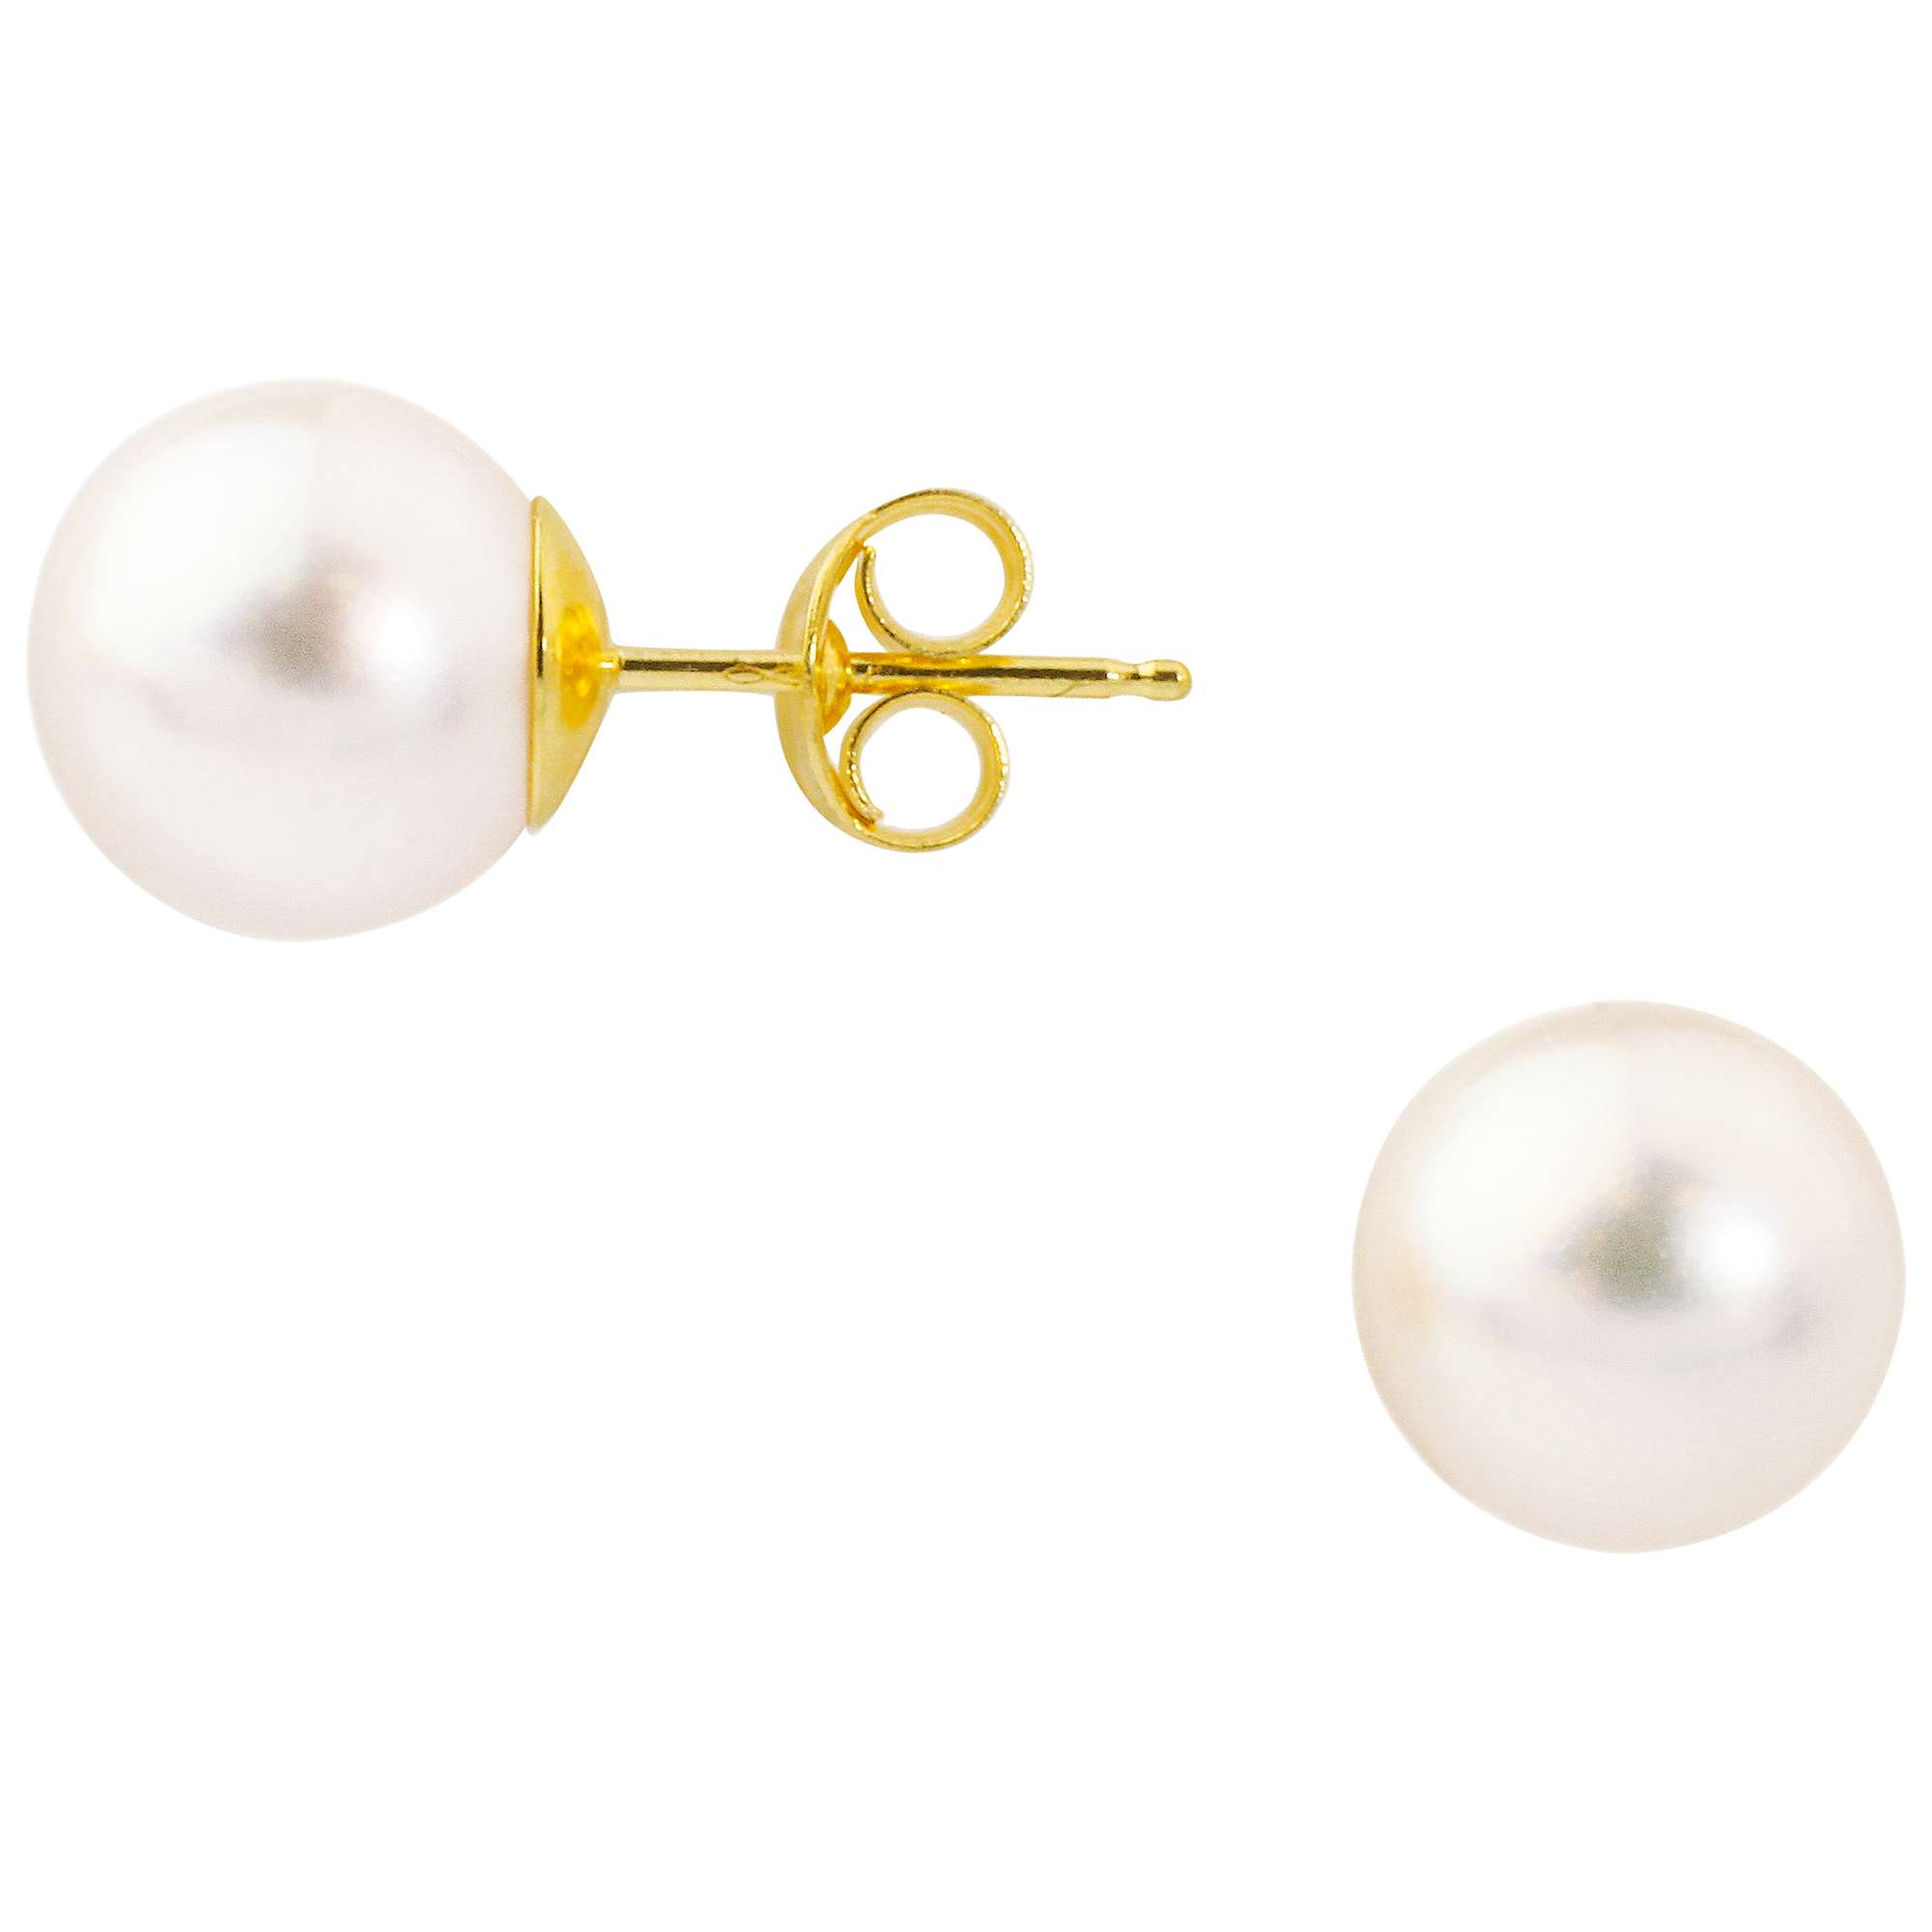 Buy A B Davis 18ct Yellow Gold Pearl Stud Earrings, White Online at johnlewis.com